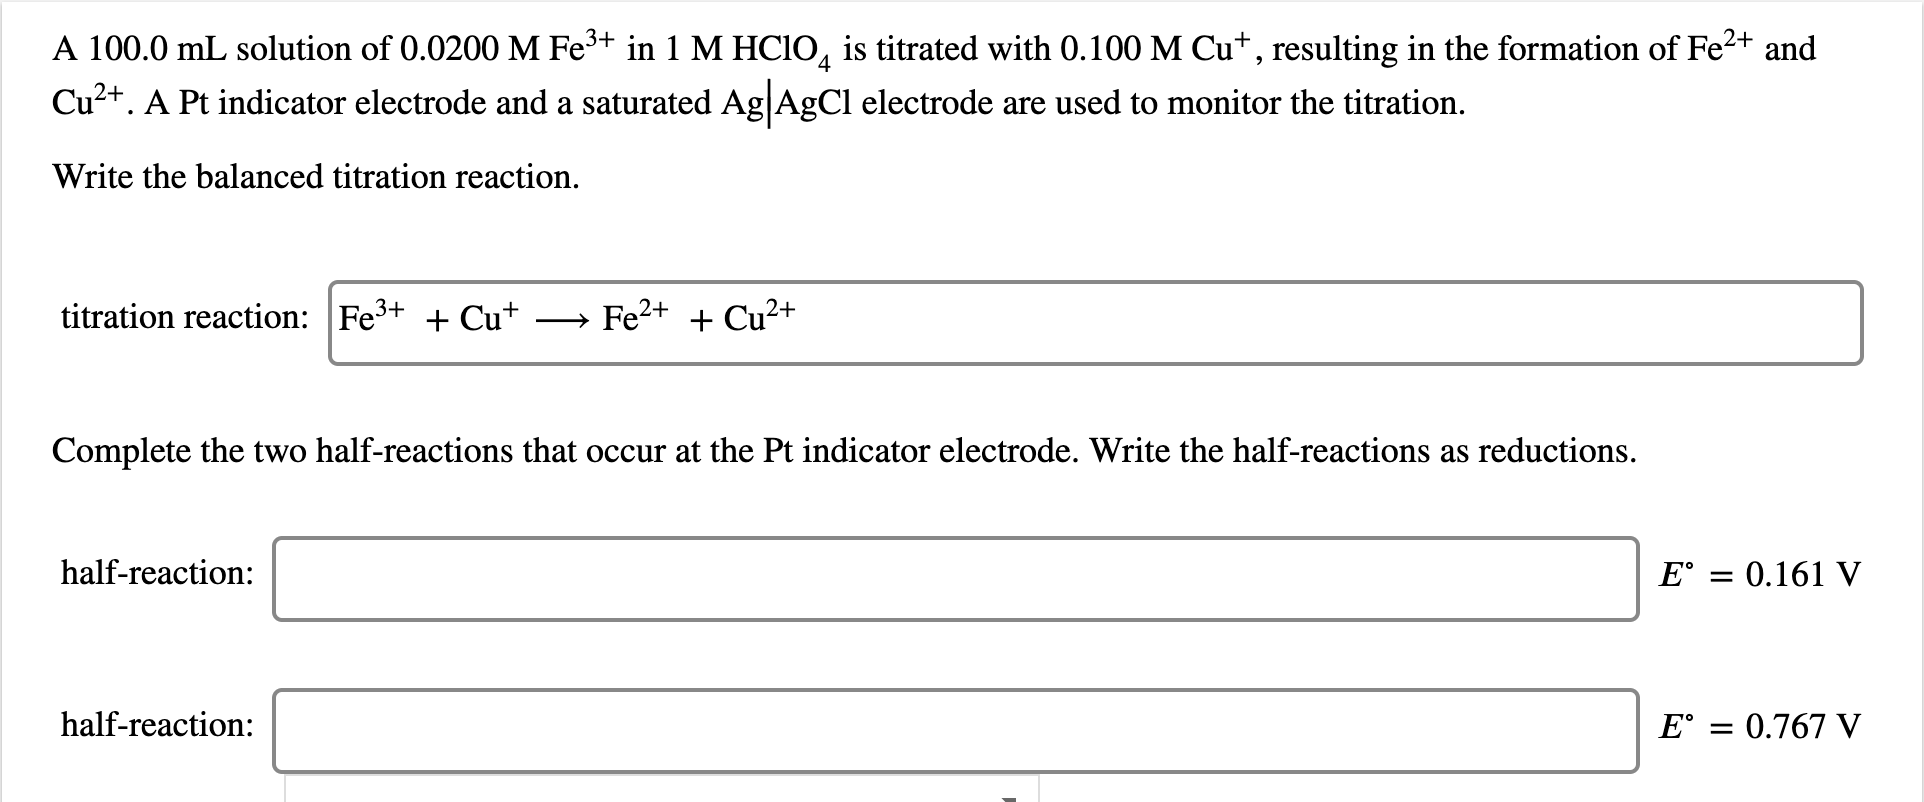 A 100.0 mL solution of 0.0200 M Fe+ in 1 M HCIO, is titrated with 0.100 M Cu*, resulting in the formation of Fe2+ and
Cu2+. A Pt indicator electrode and a saturated Ag|AgCl electrode are used to monitor the titration.
Write the balanced titration reaction.
titration reaction: Fe3+ + Cu+
Fe2+ + Cu?+
Complete the two half-reactions that occur at the Pt indicator electrode. Write the half-reactions as reductions.
half-reaction:
E° = 0.161 V
half-reaction:
E° = 0.767 V
